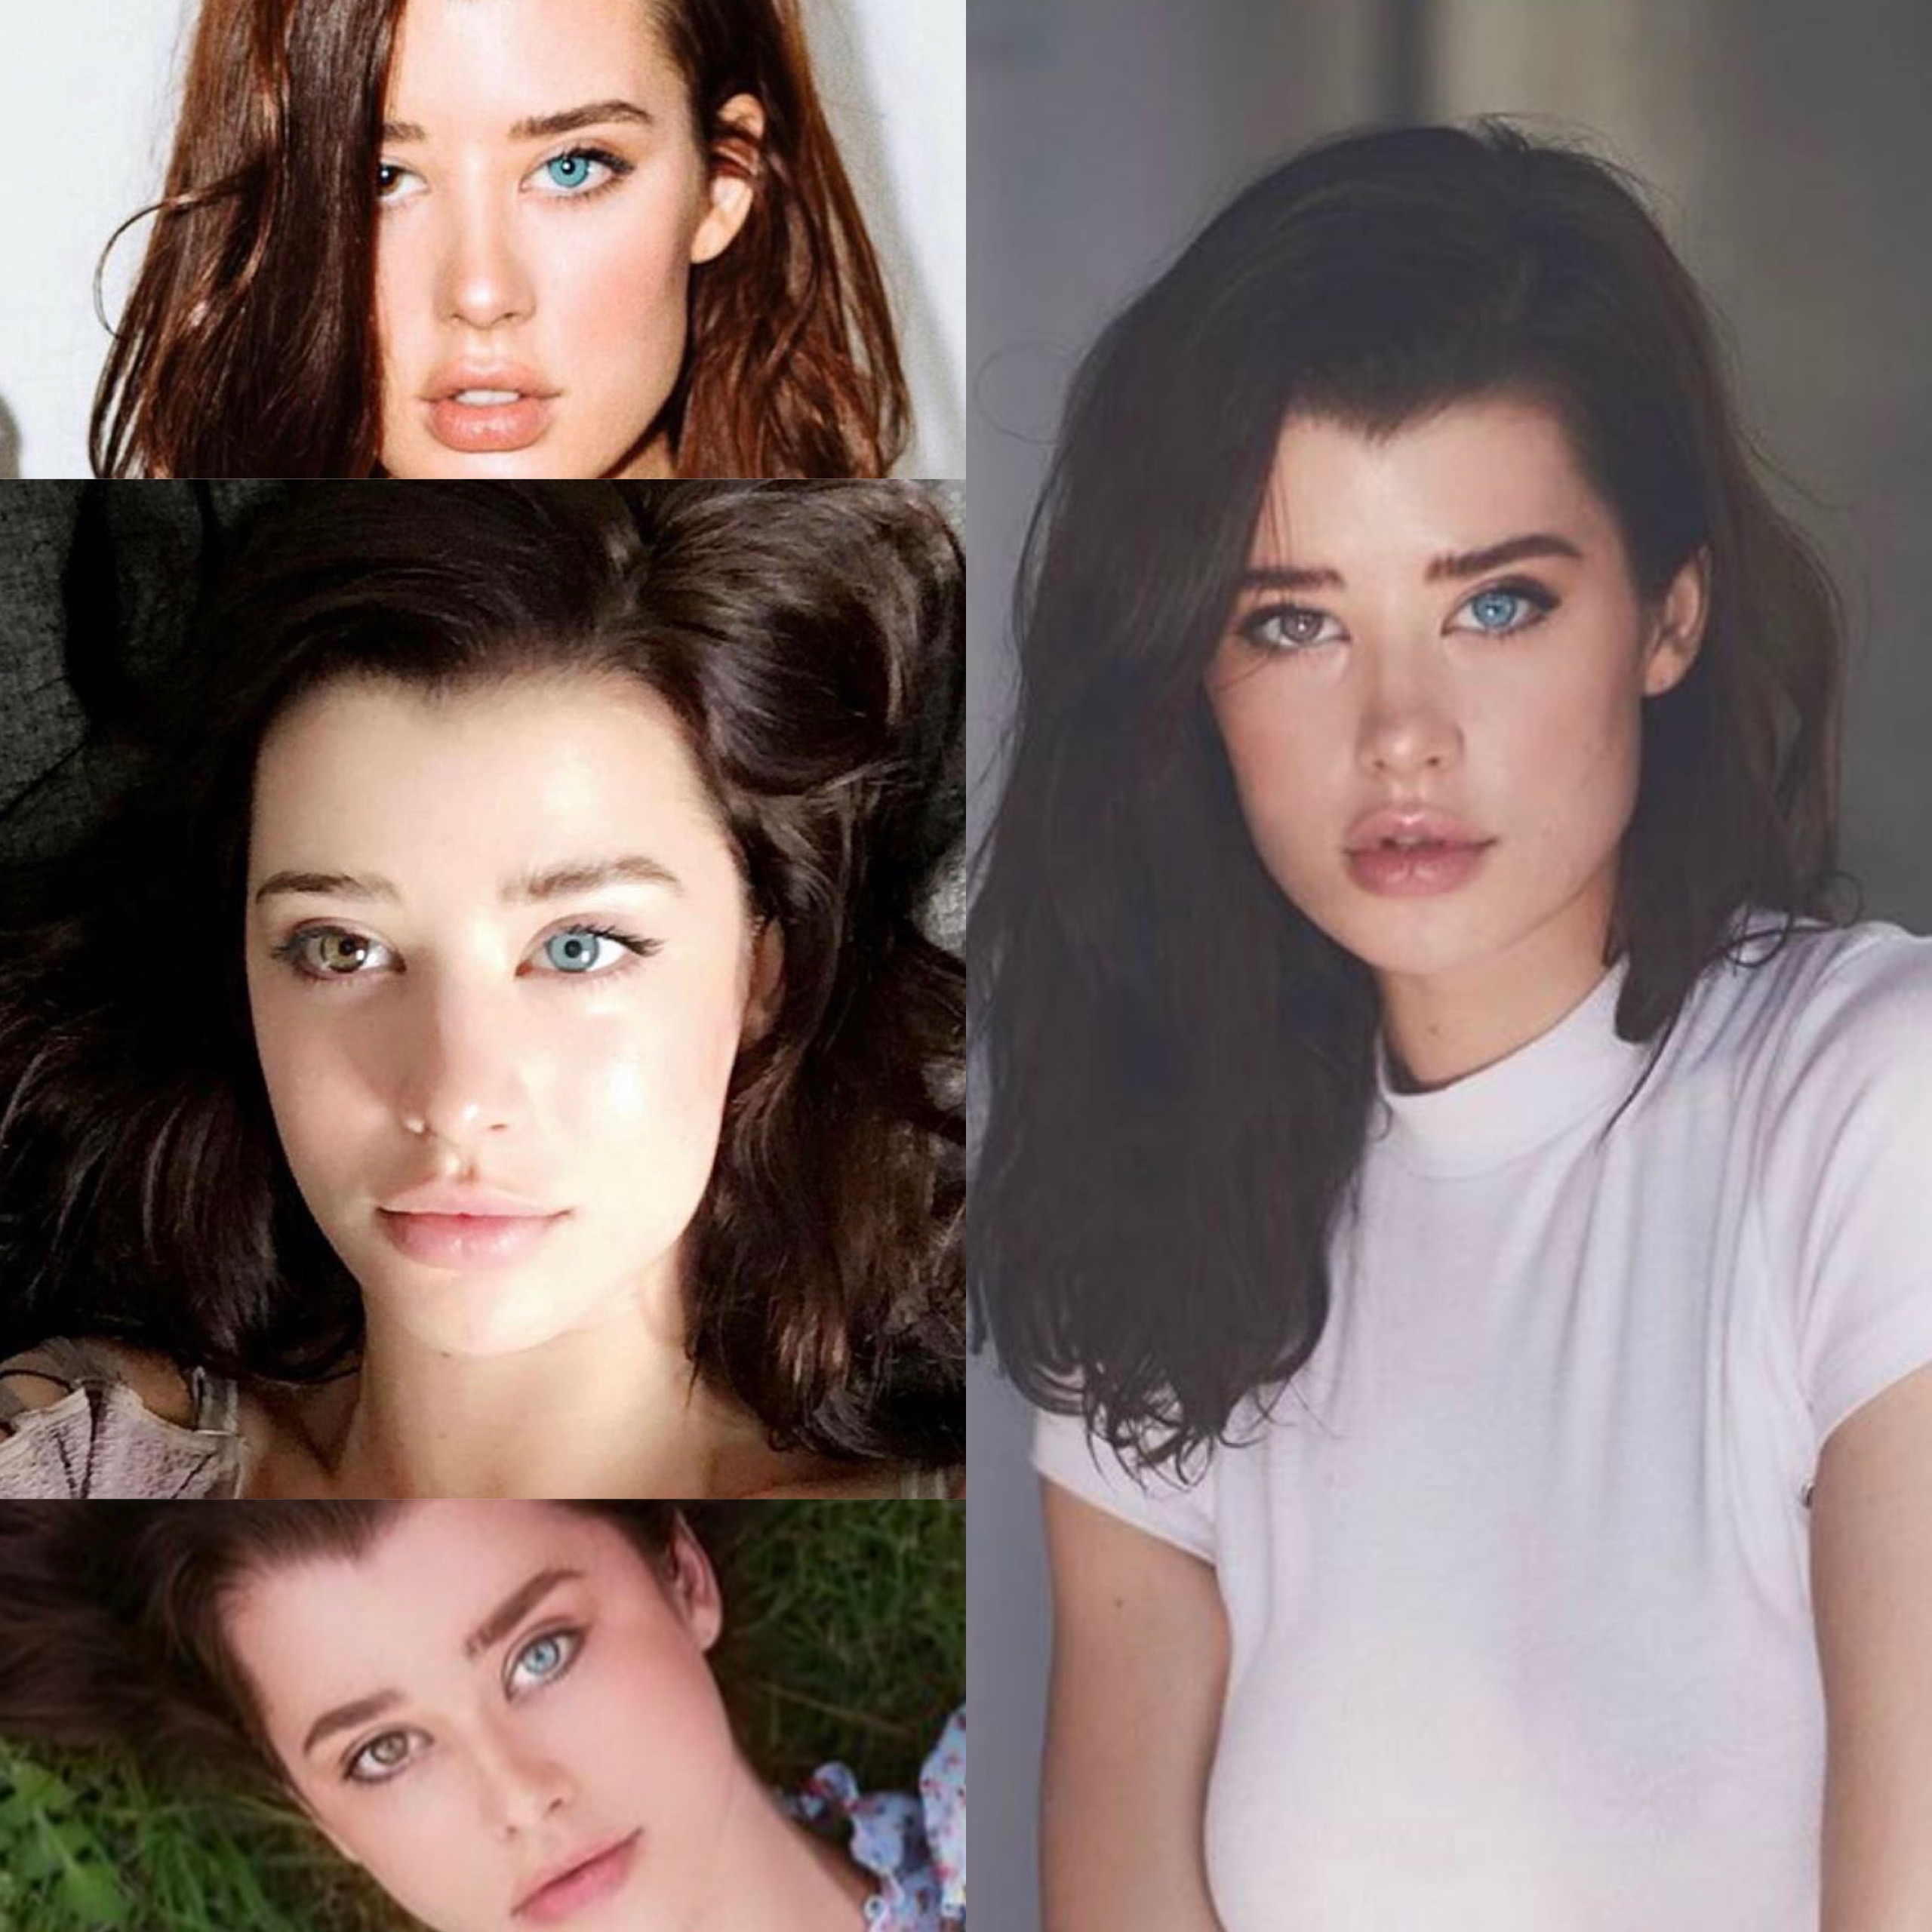 Is it true that Sarah McDaniel is faking about her heterochromia